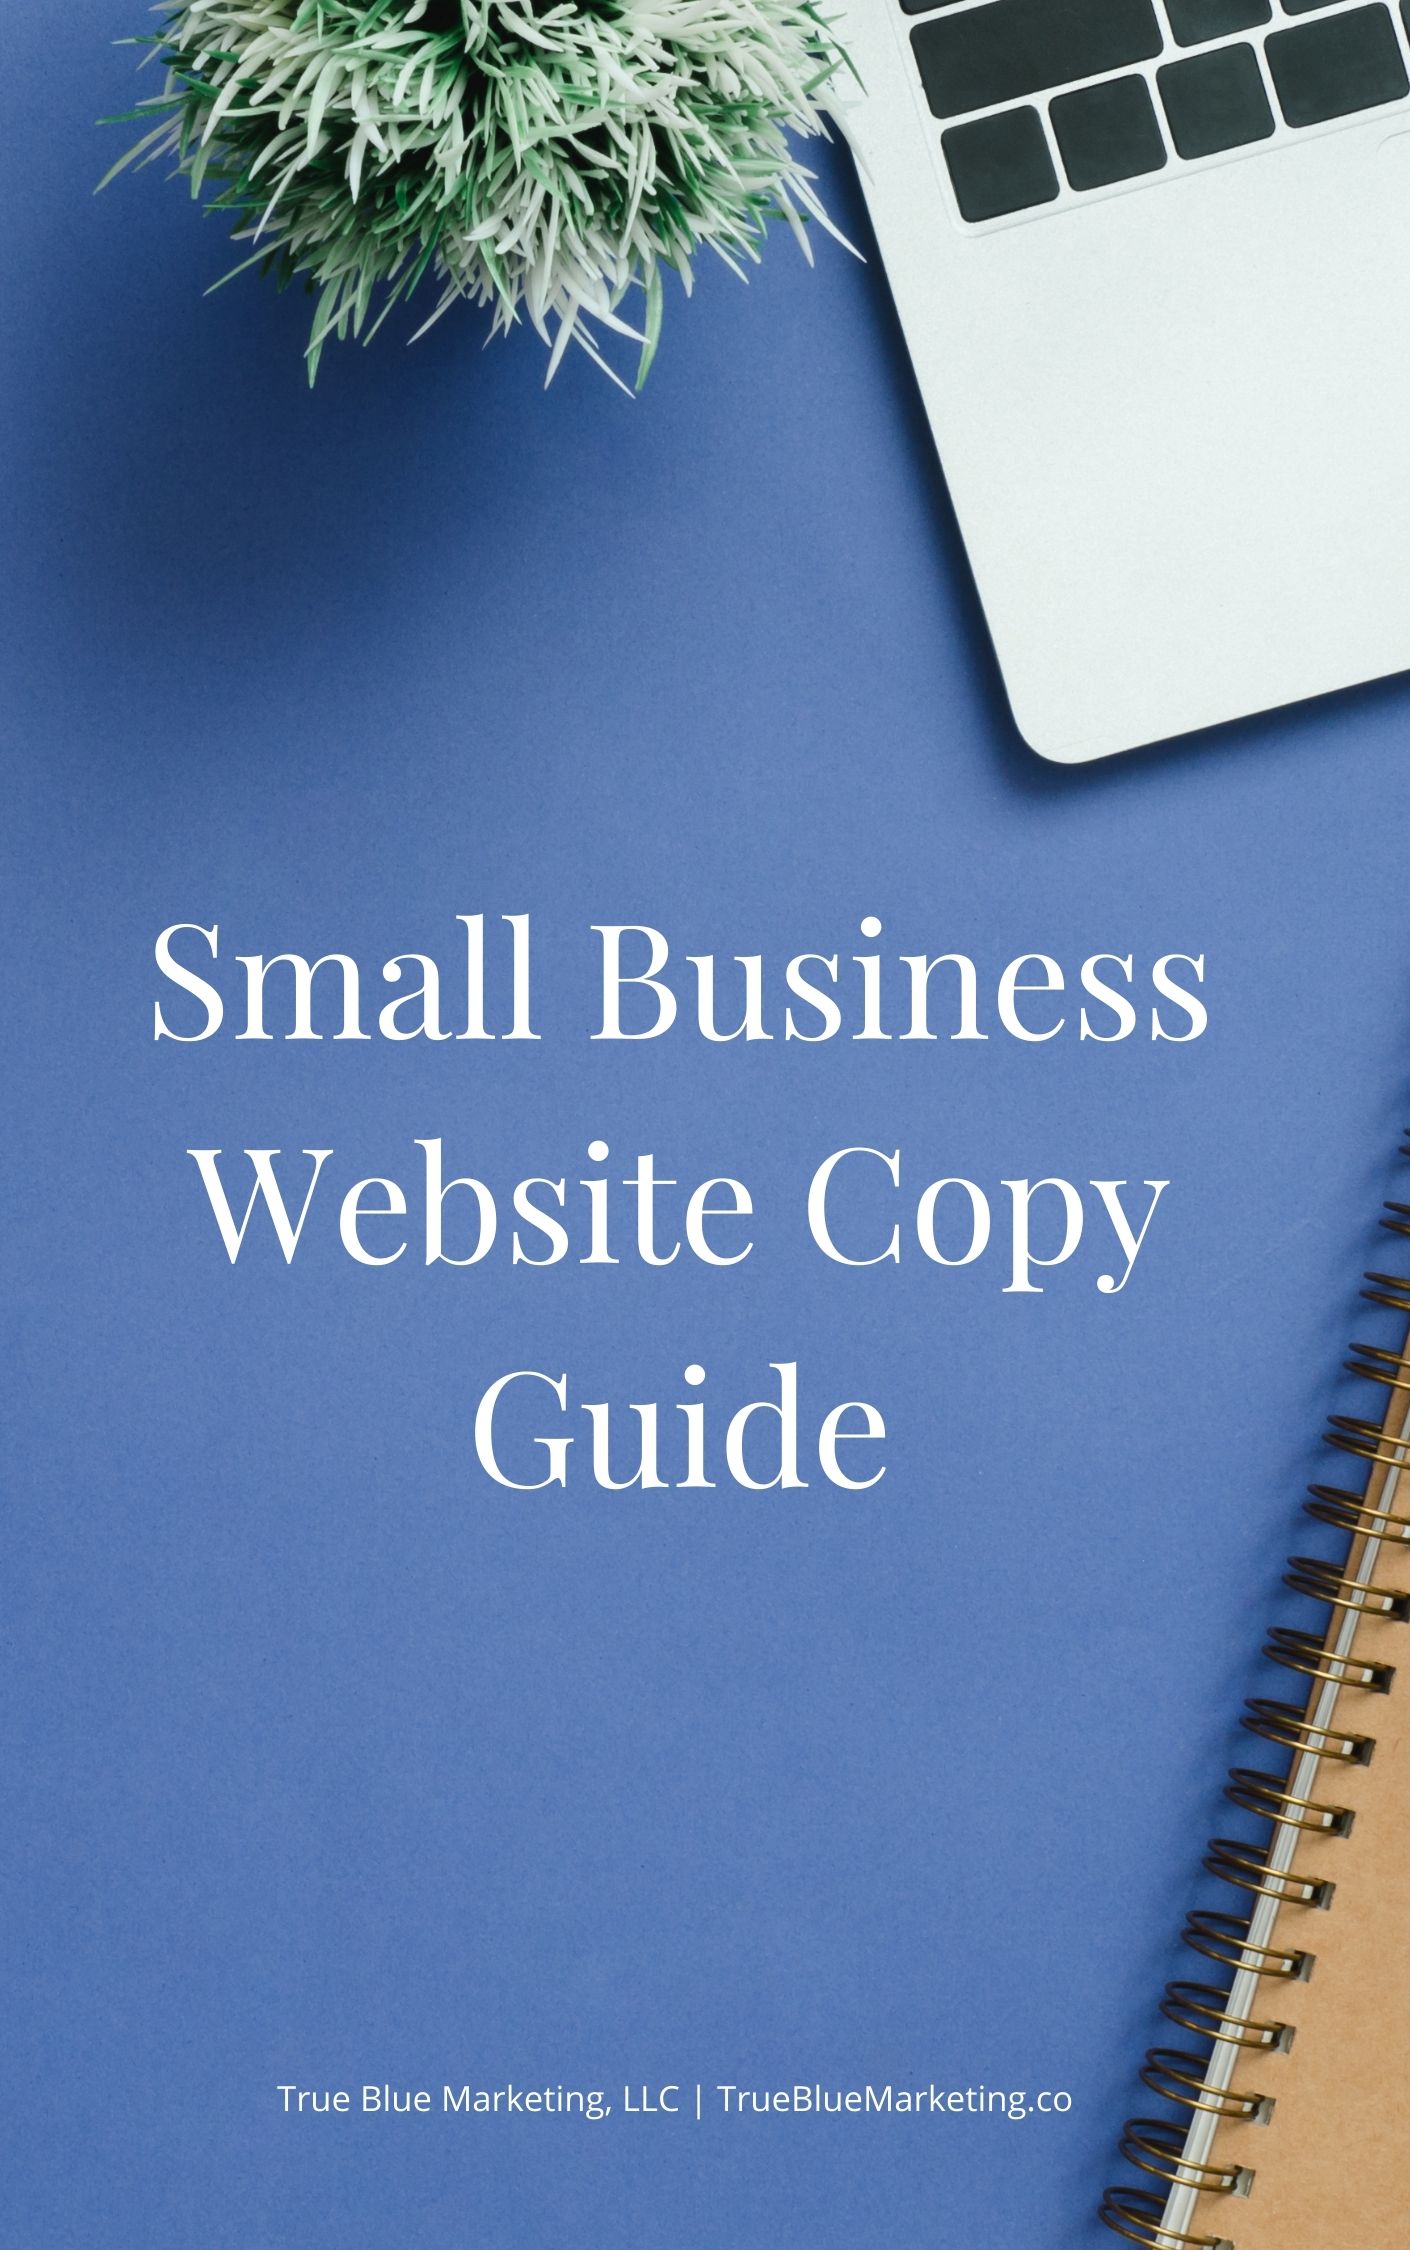 Cover of the Small Business Website Copy Guide